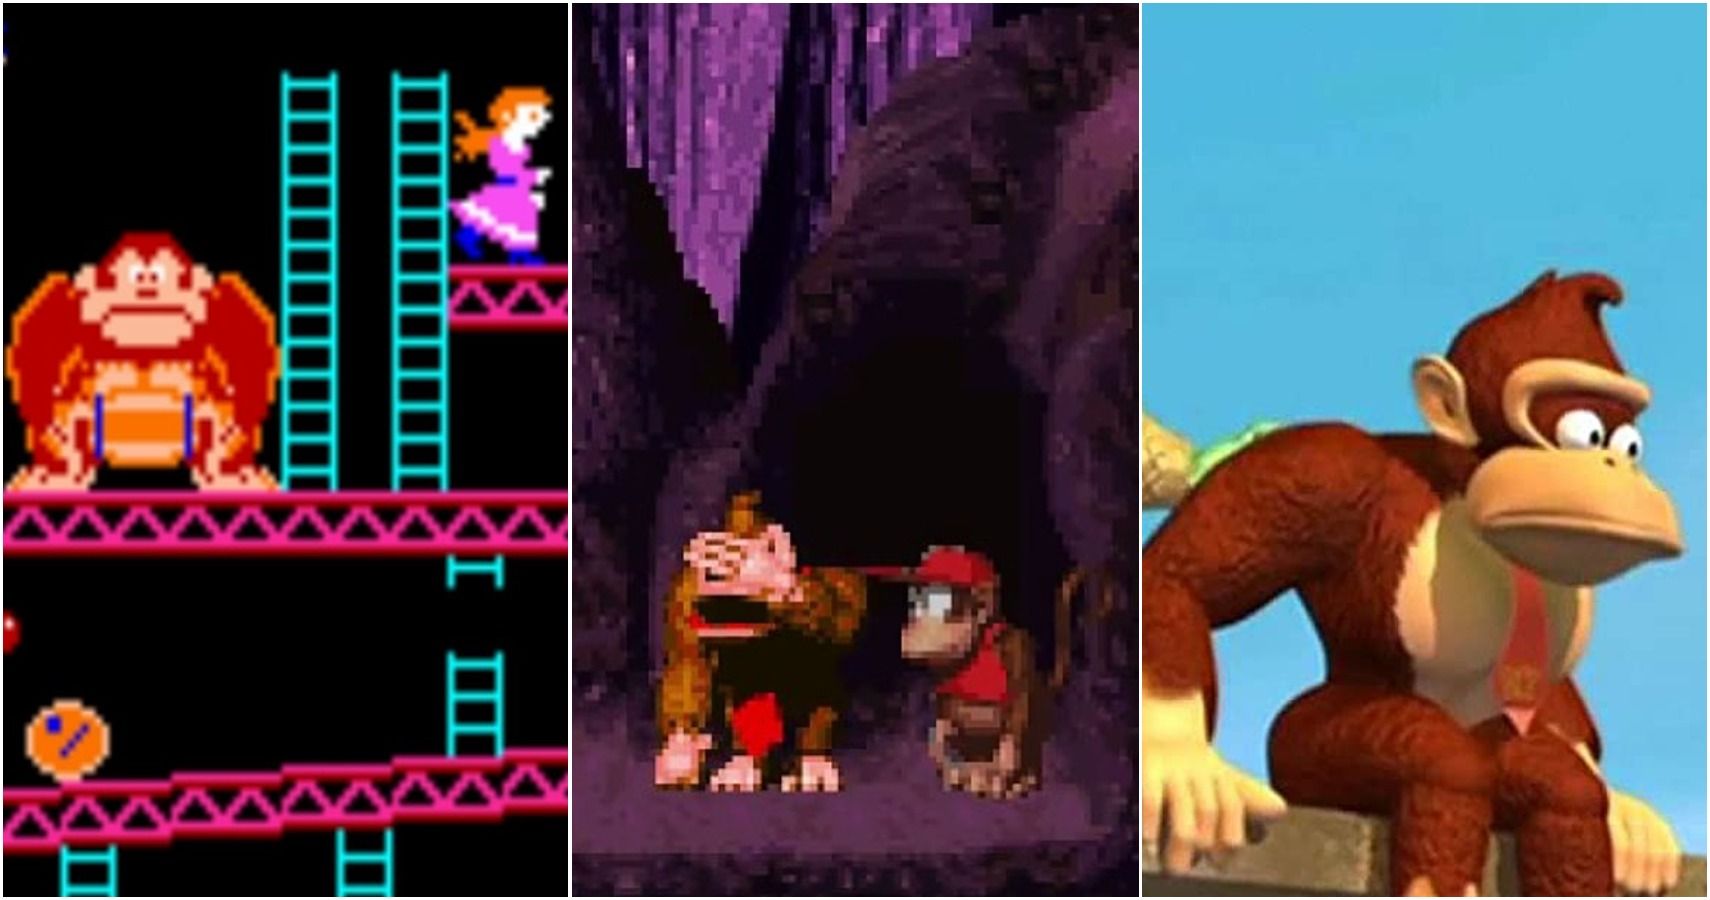 split image of Donkey Kong arcade, Kong in cave and upset Kong in DKC cartoon